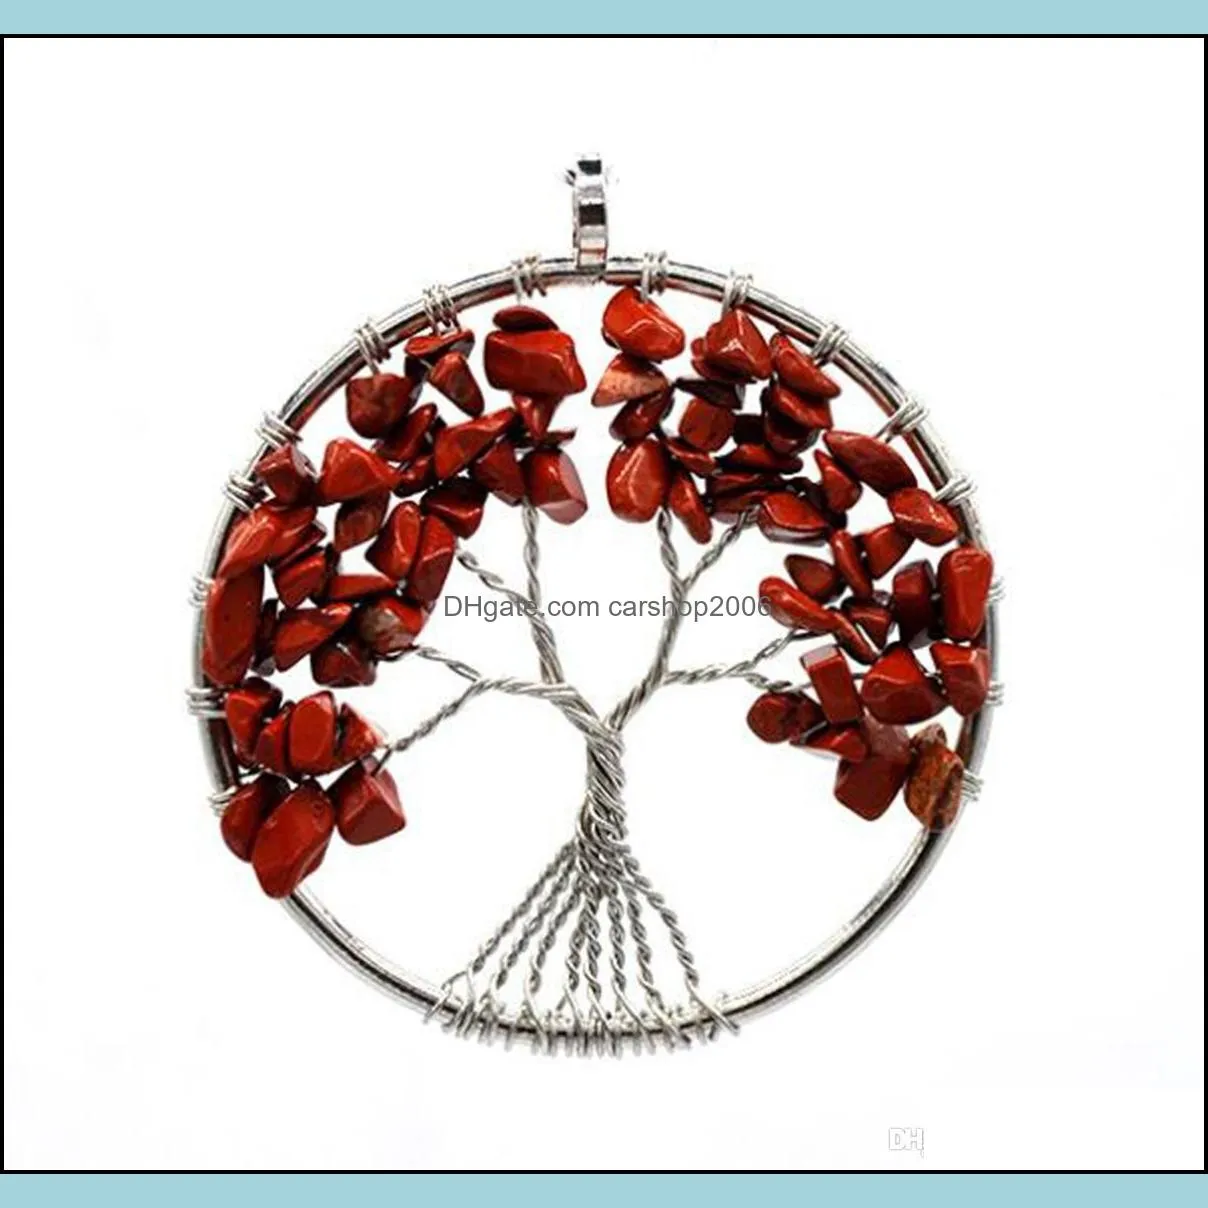 Tree of Life Necklace 7 Chakra Stone Beads Natural Amethyst Sterling-silver-jewelry Chain Choker Pendant Necklaces for Women Gift